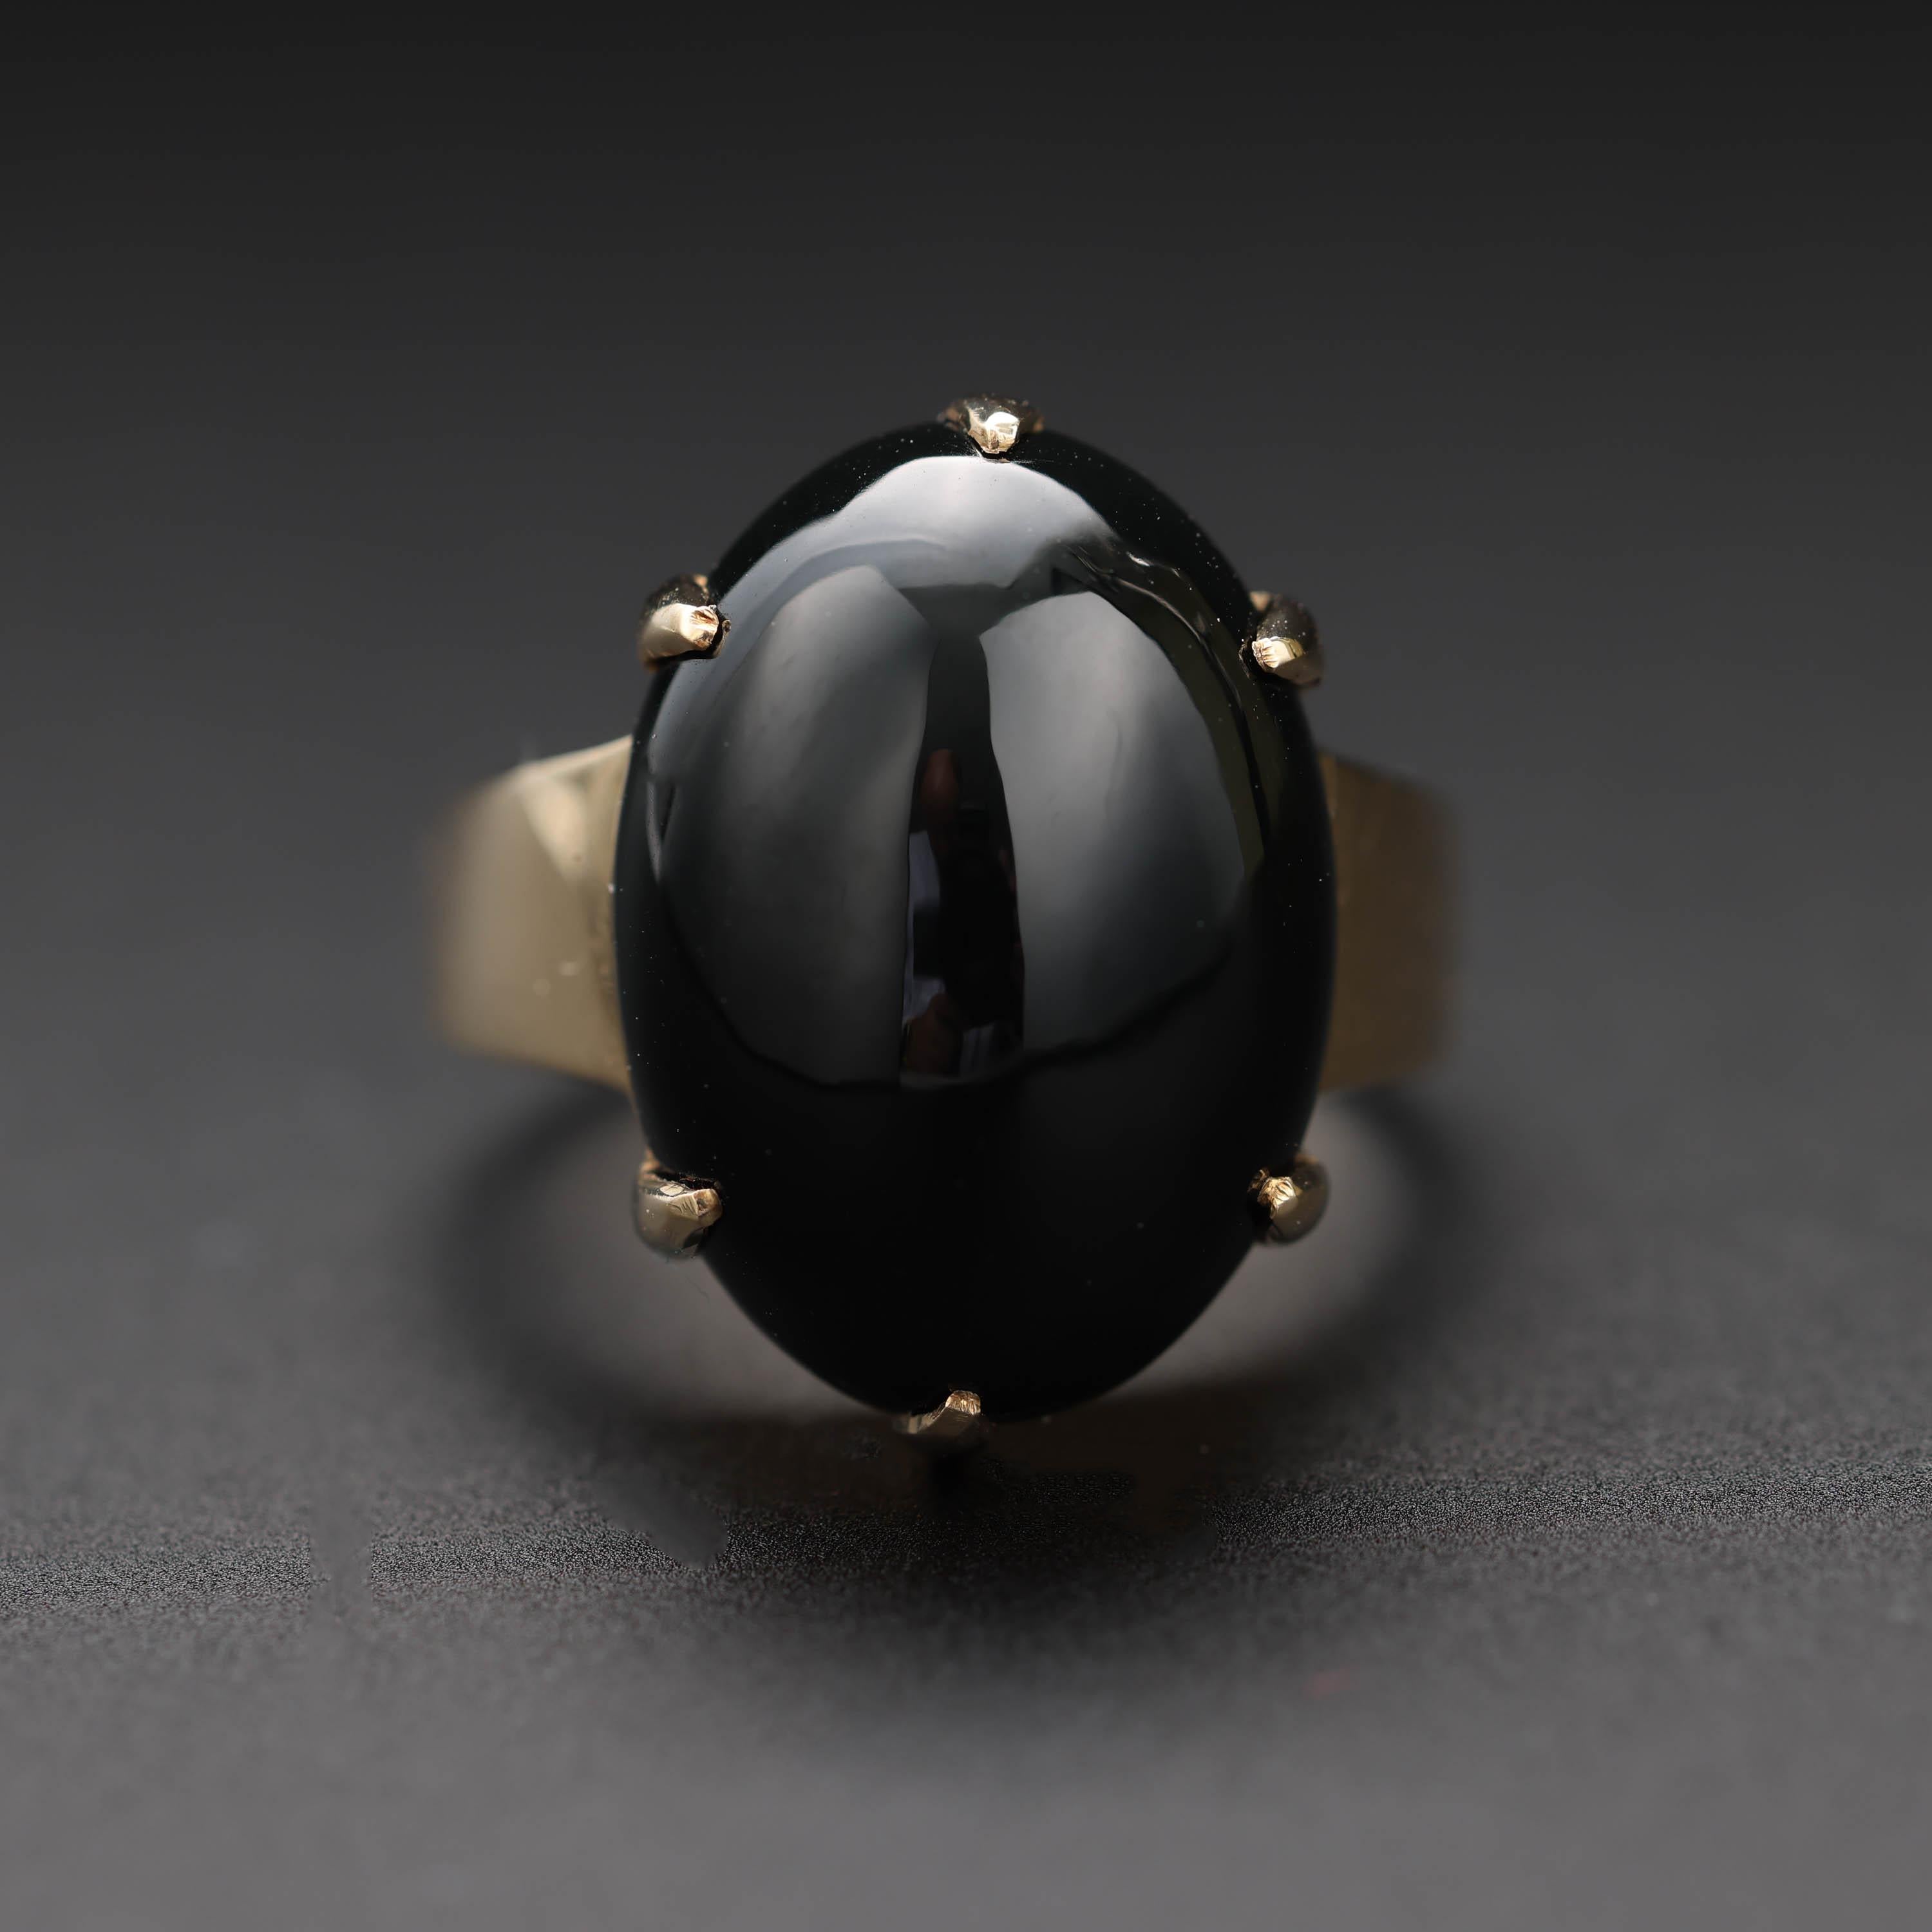 This is an iconic black jade ring from Gump's San Francisco featuring an oval cabochon of natural and untreated black jade. This style of jade ring has proven incredibly elusive; I almost never encounter other rings like this one. The piano-black